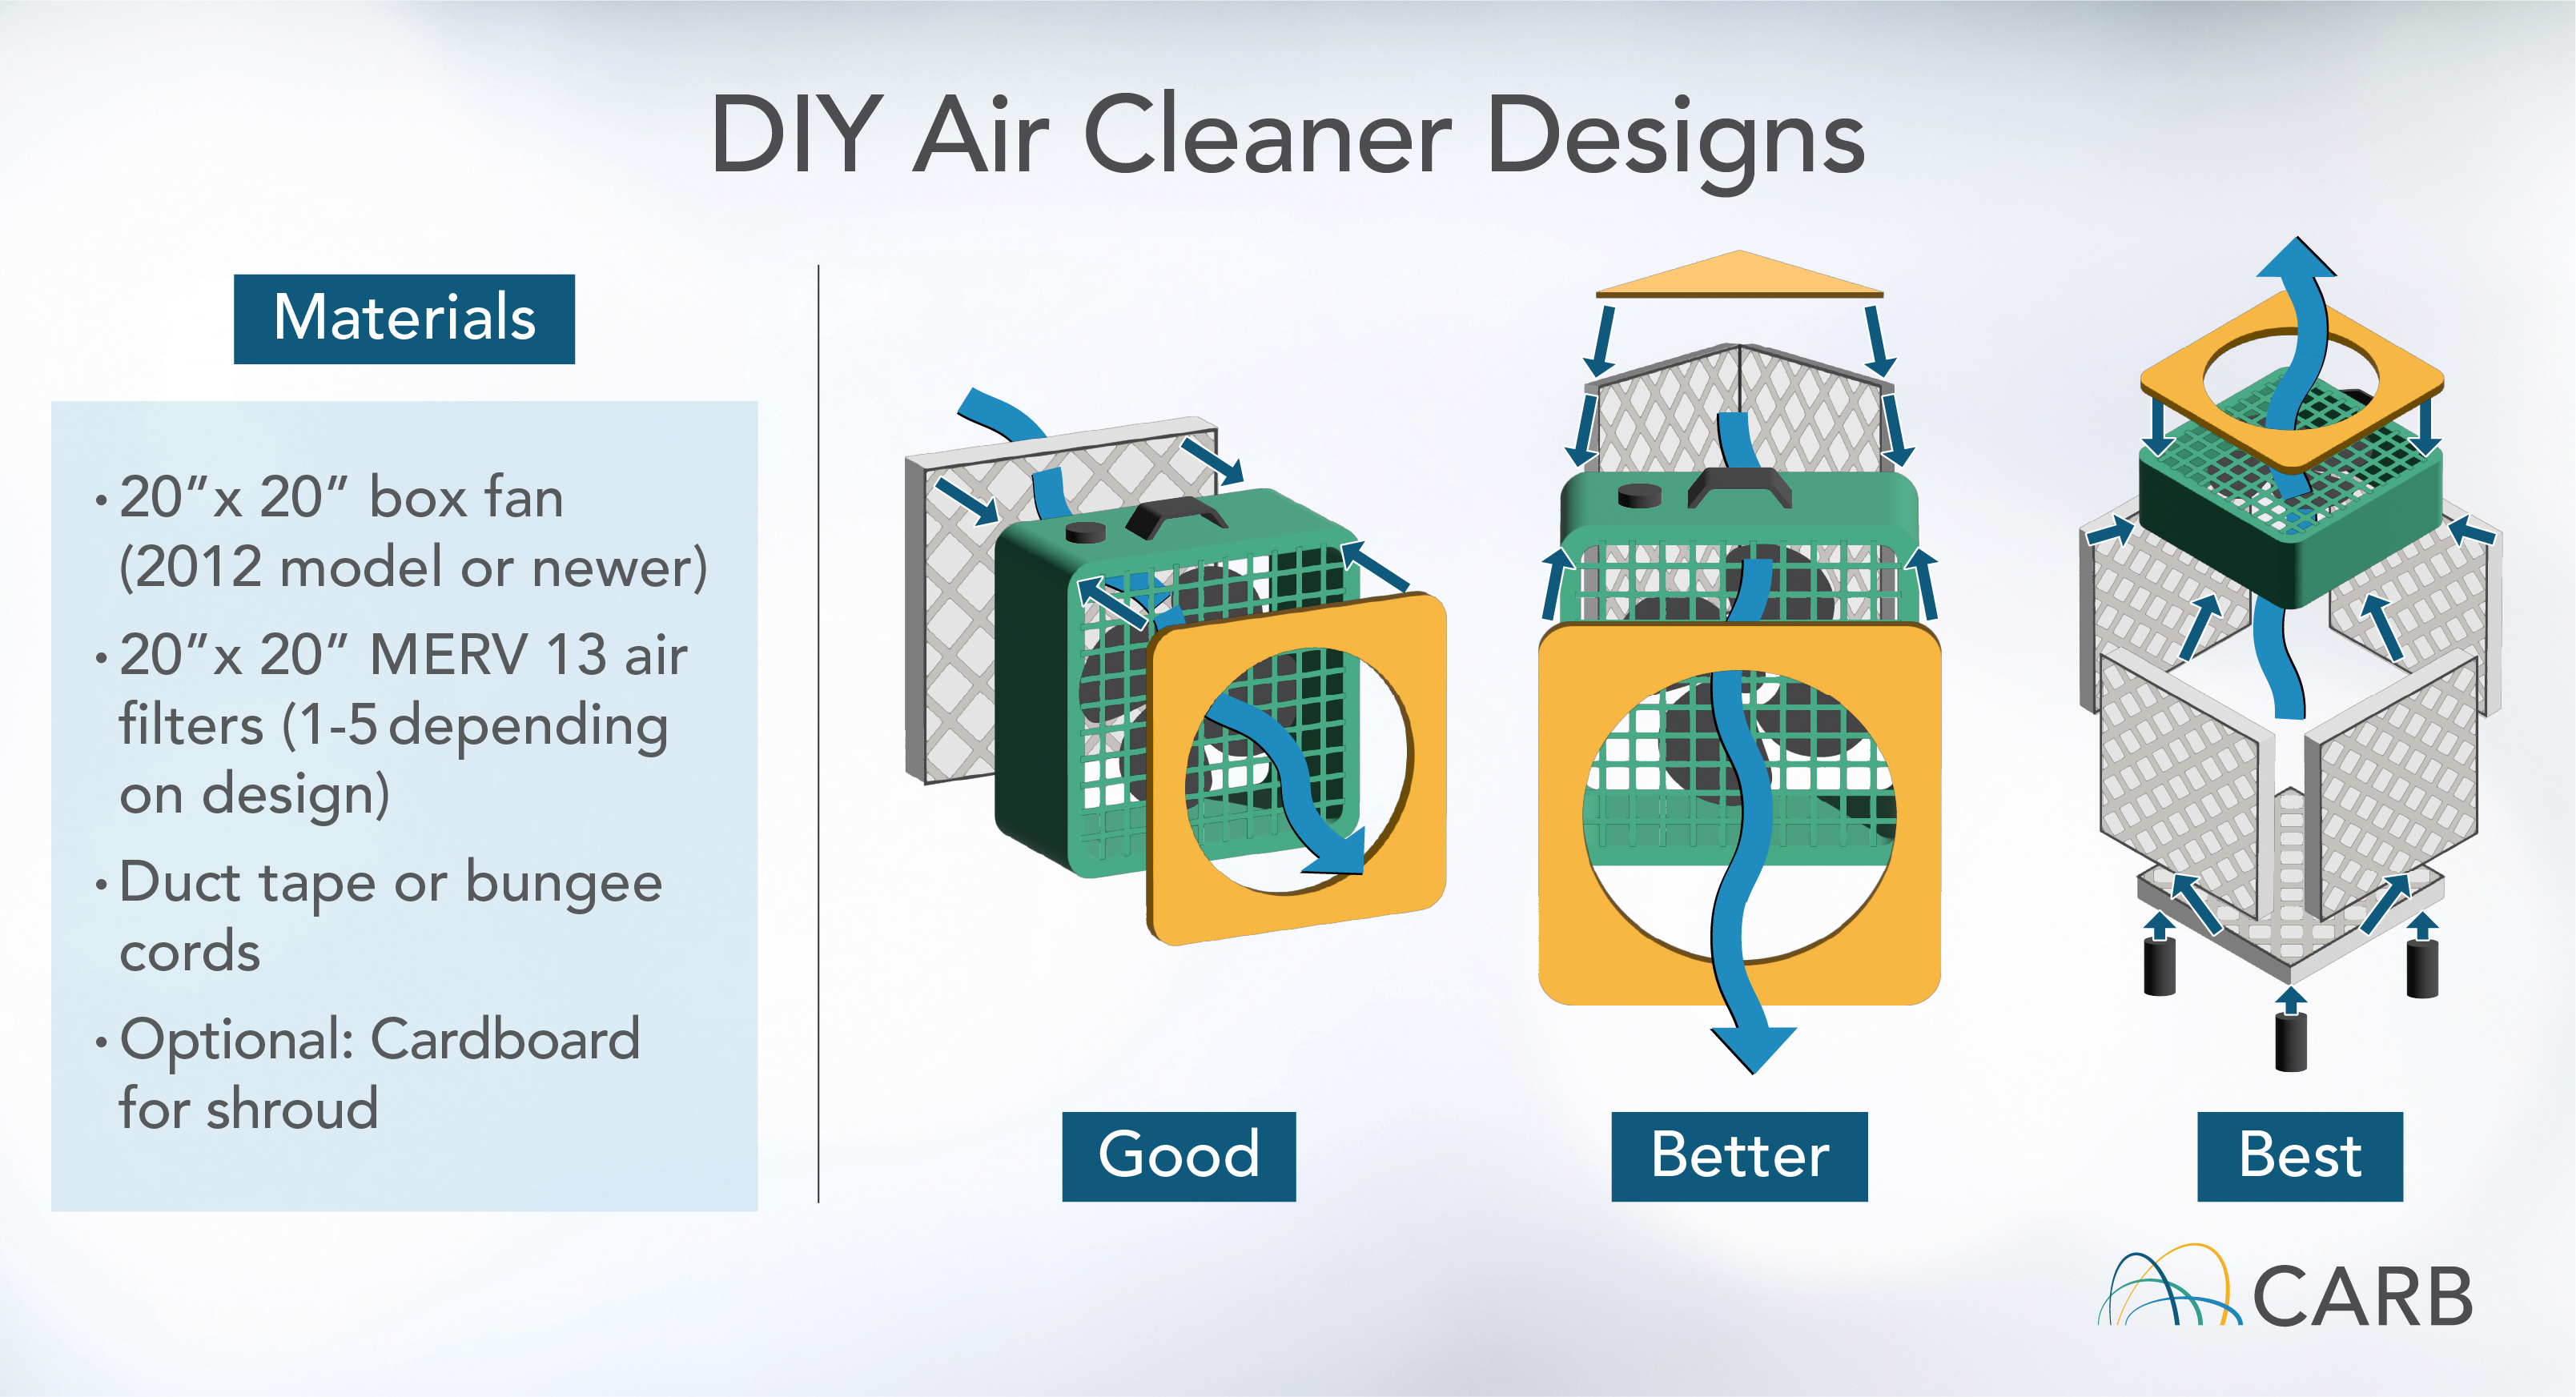 DIY Air Cleaner Designs: Good, Better, Best. Materials Needed: 20”x 20” box fan (2012 model or newer), 20”x 20” MERV 13 air filters (1-5 depending on design), Duct tape or bungee cords, Optional: Cardboard for shroud 